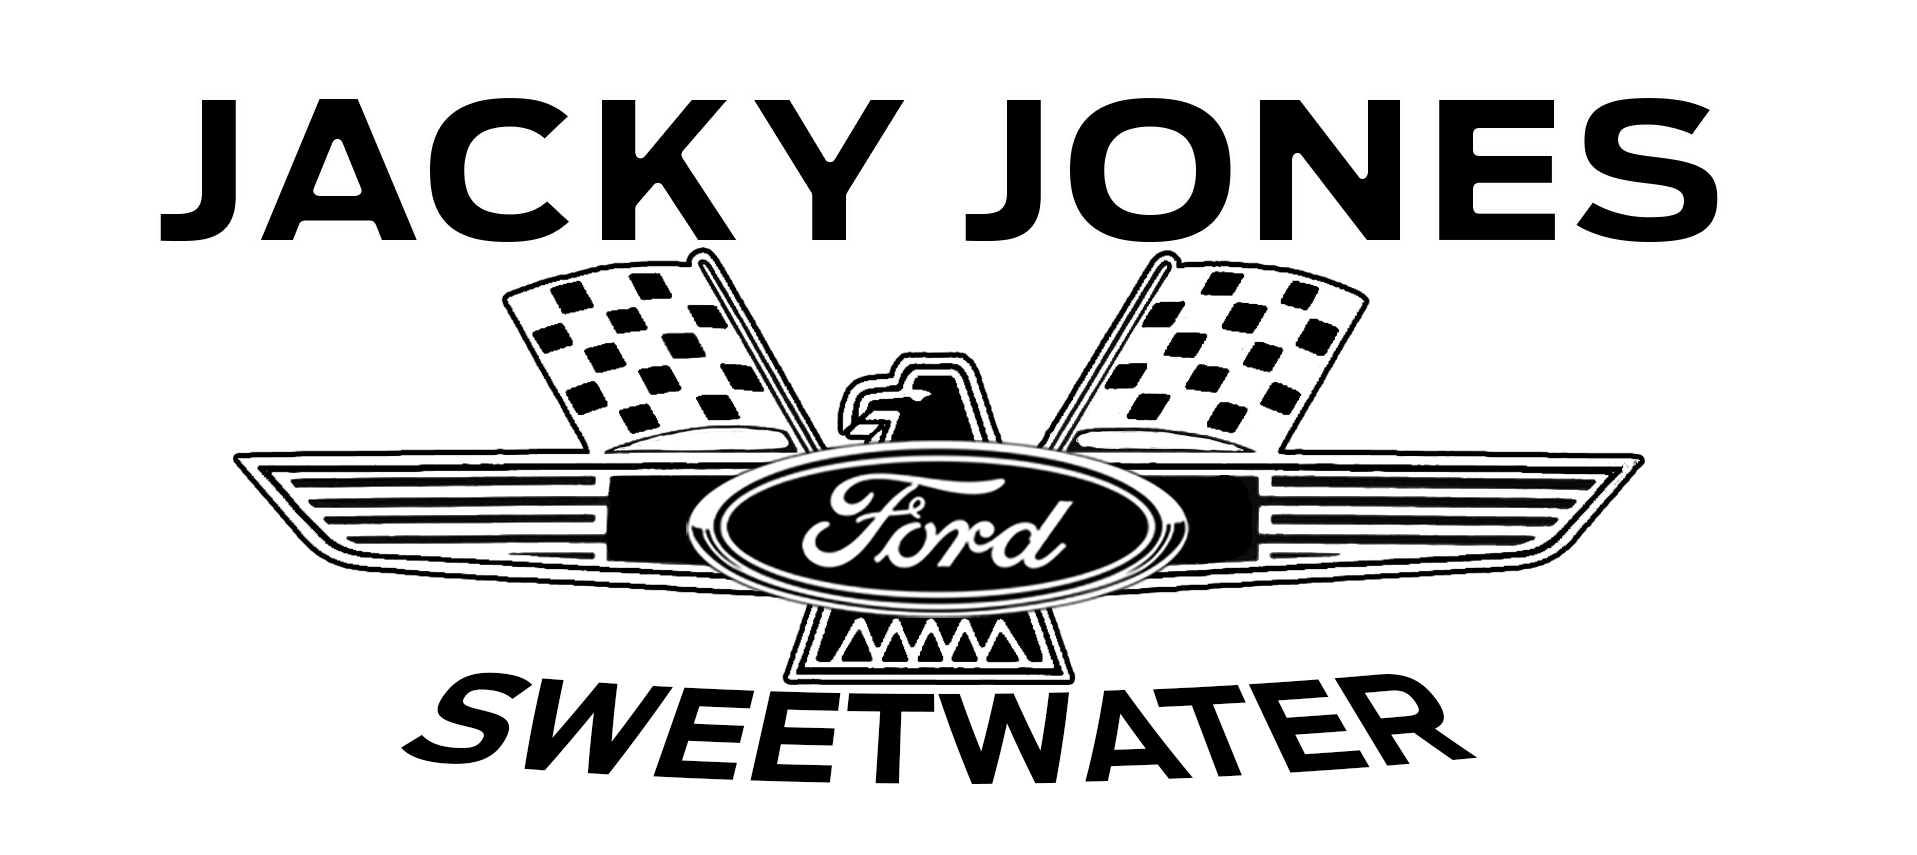 Jacky Jones Ford of Sweetwater